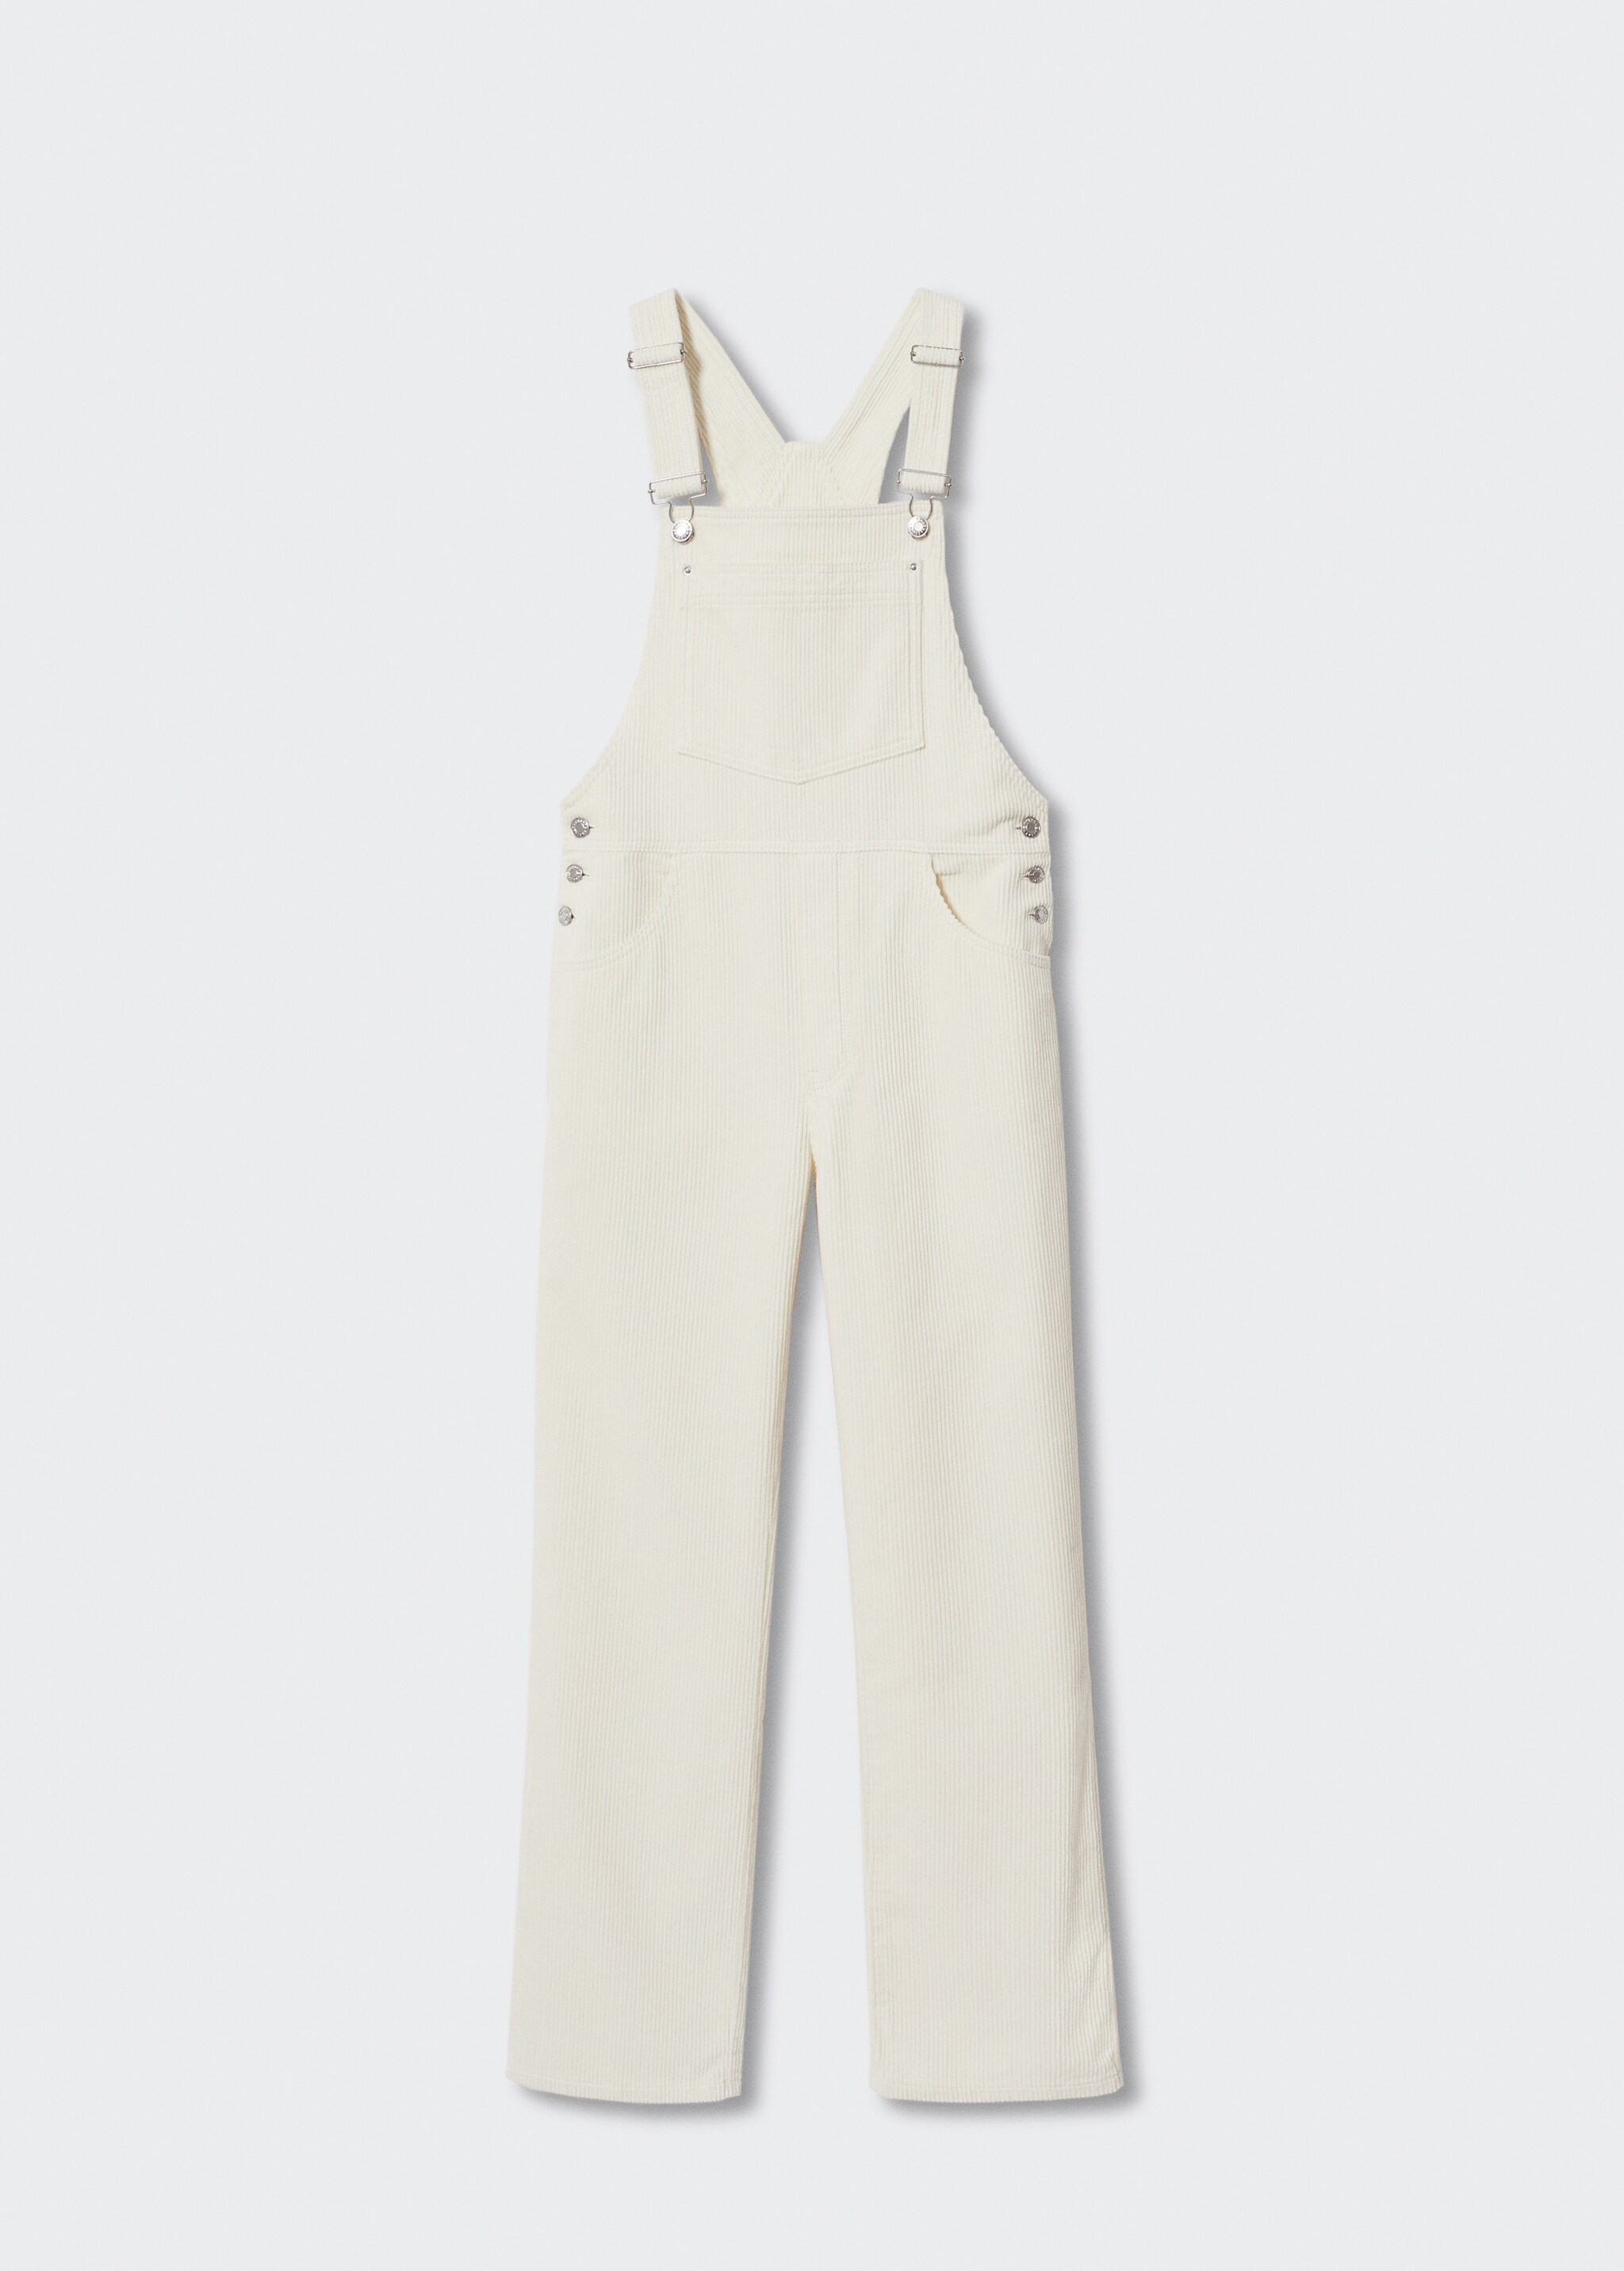 Corduroy dungarees - Article without model